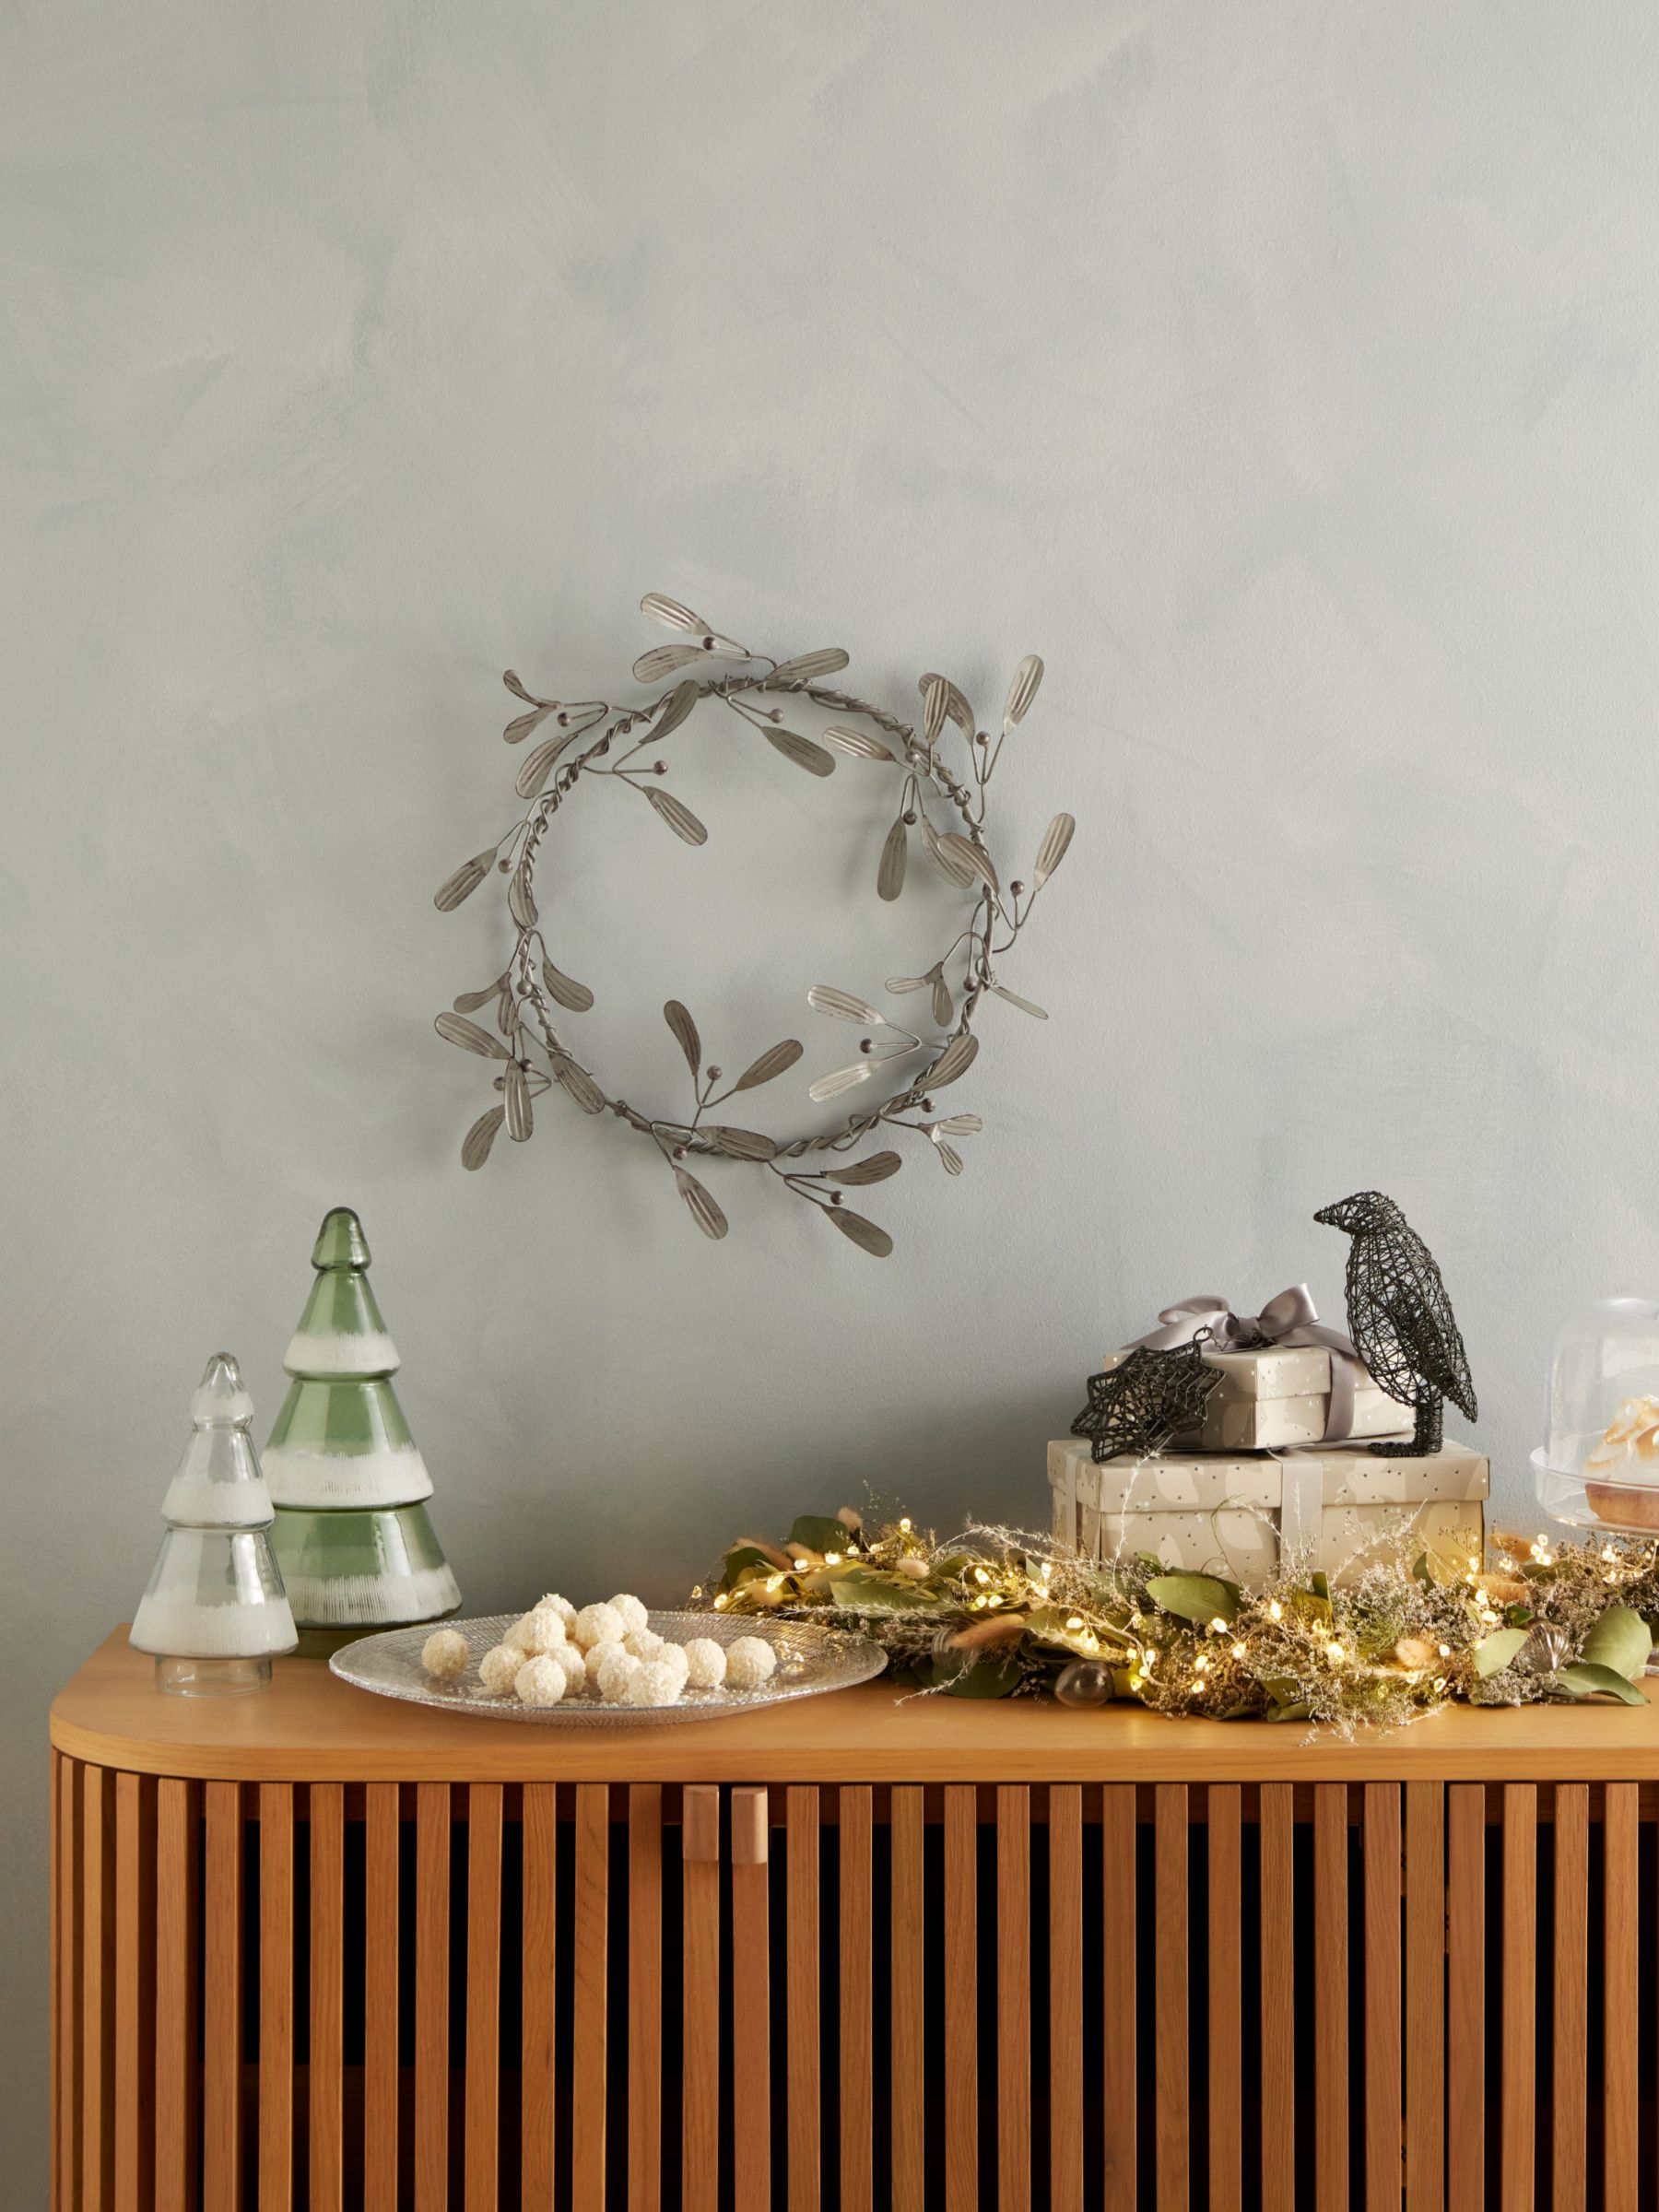 John Lewis & Partners Christams Decorating Ideas and Trends - Polar Planet